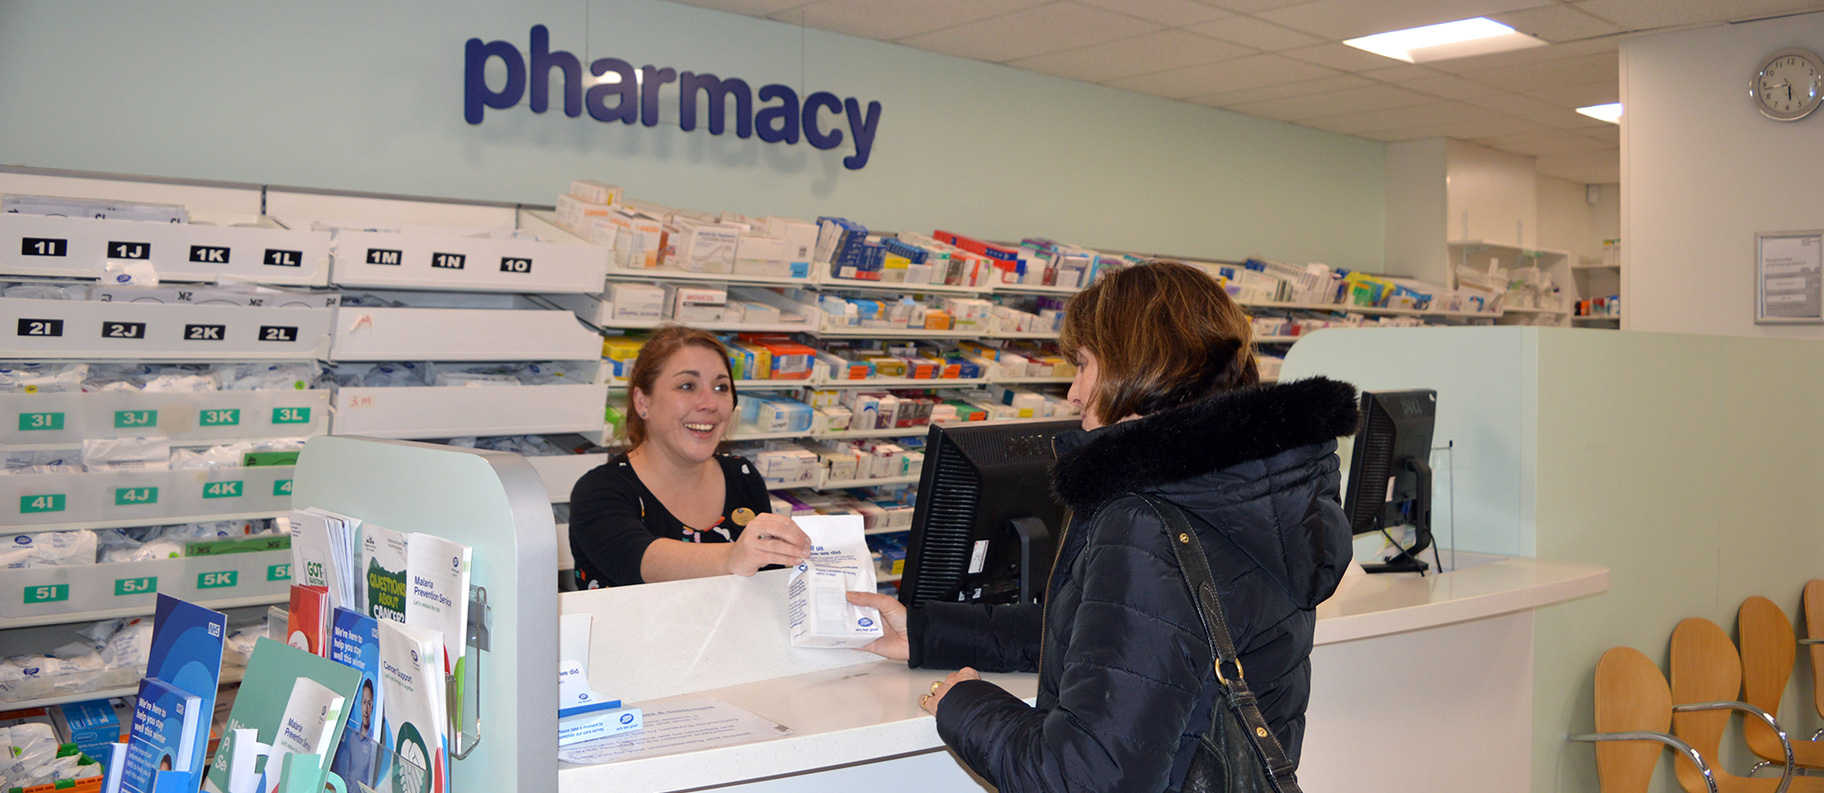 By Boots Pharmacists for Boots Pharmacists